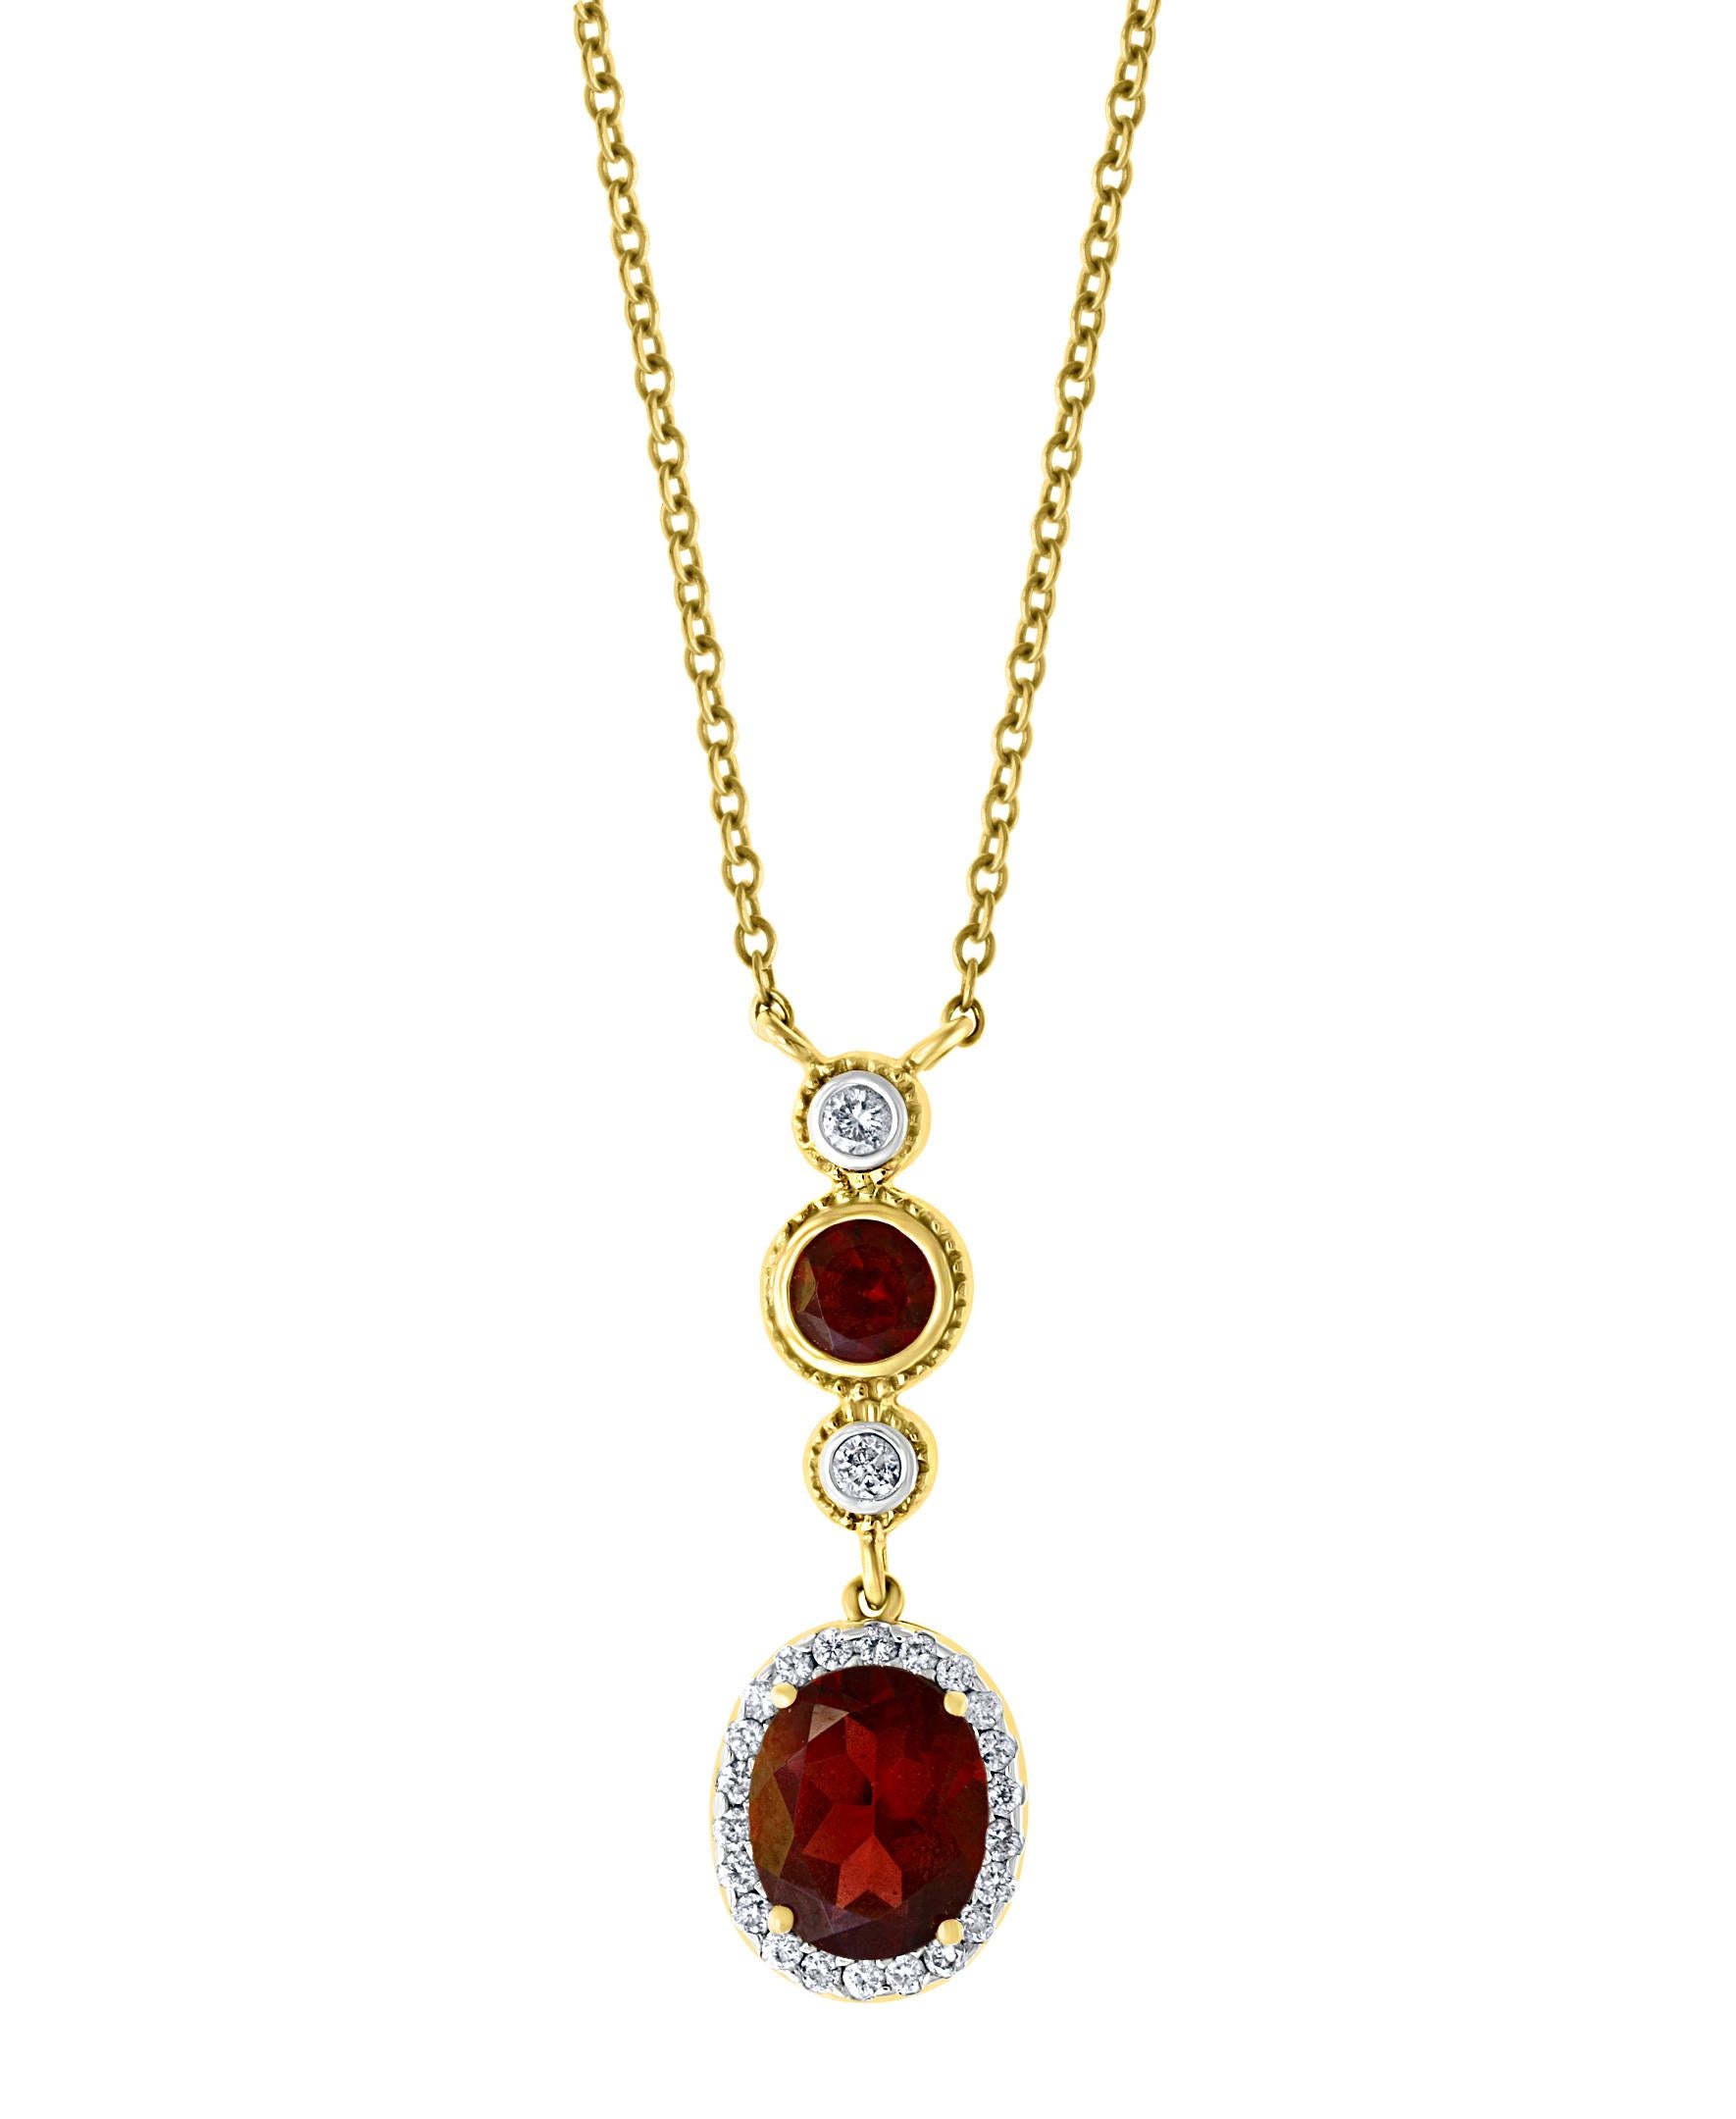 Approximately 6 Carat Oval Shape Garnet & 0.6 Carat Diamond Necklace in 14 Karat Yellow Gold
This Simple yet elegant Necklace  consisting of a Two oval shape Garnet  surrounding by brilliant cut round diamonds with a solid 14 Karat yellow gold